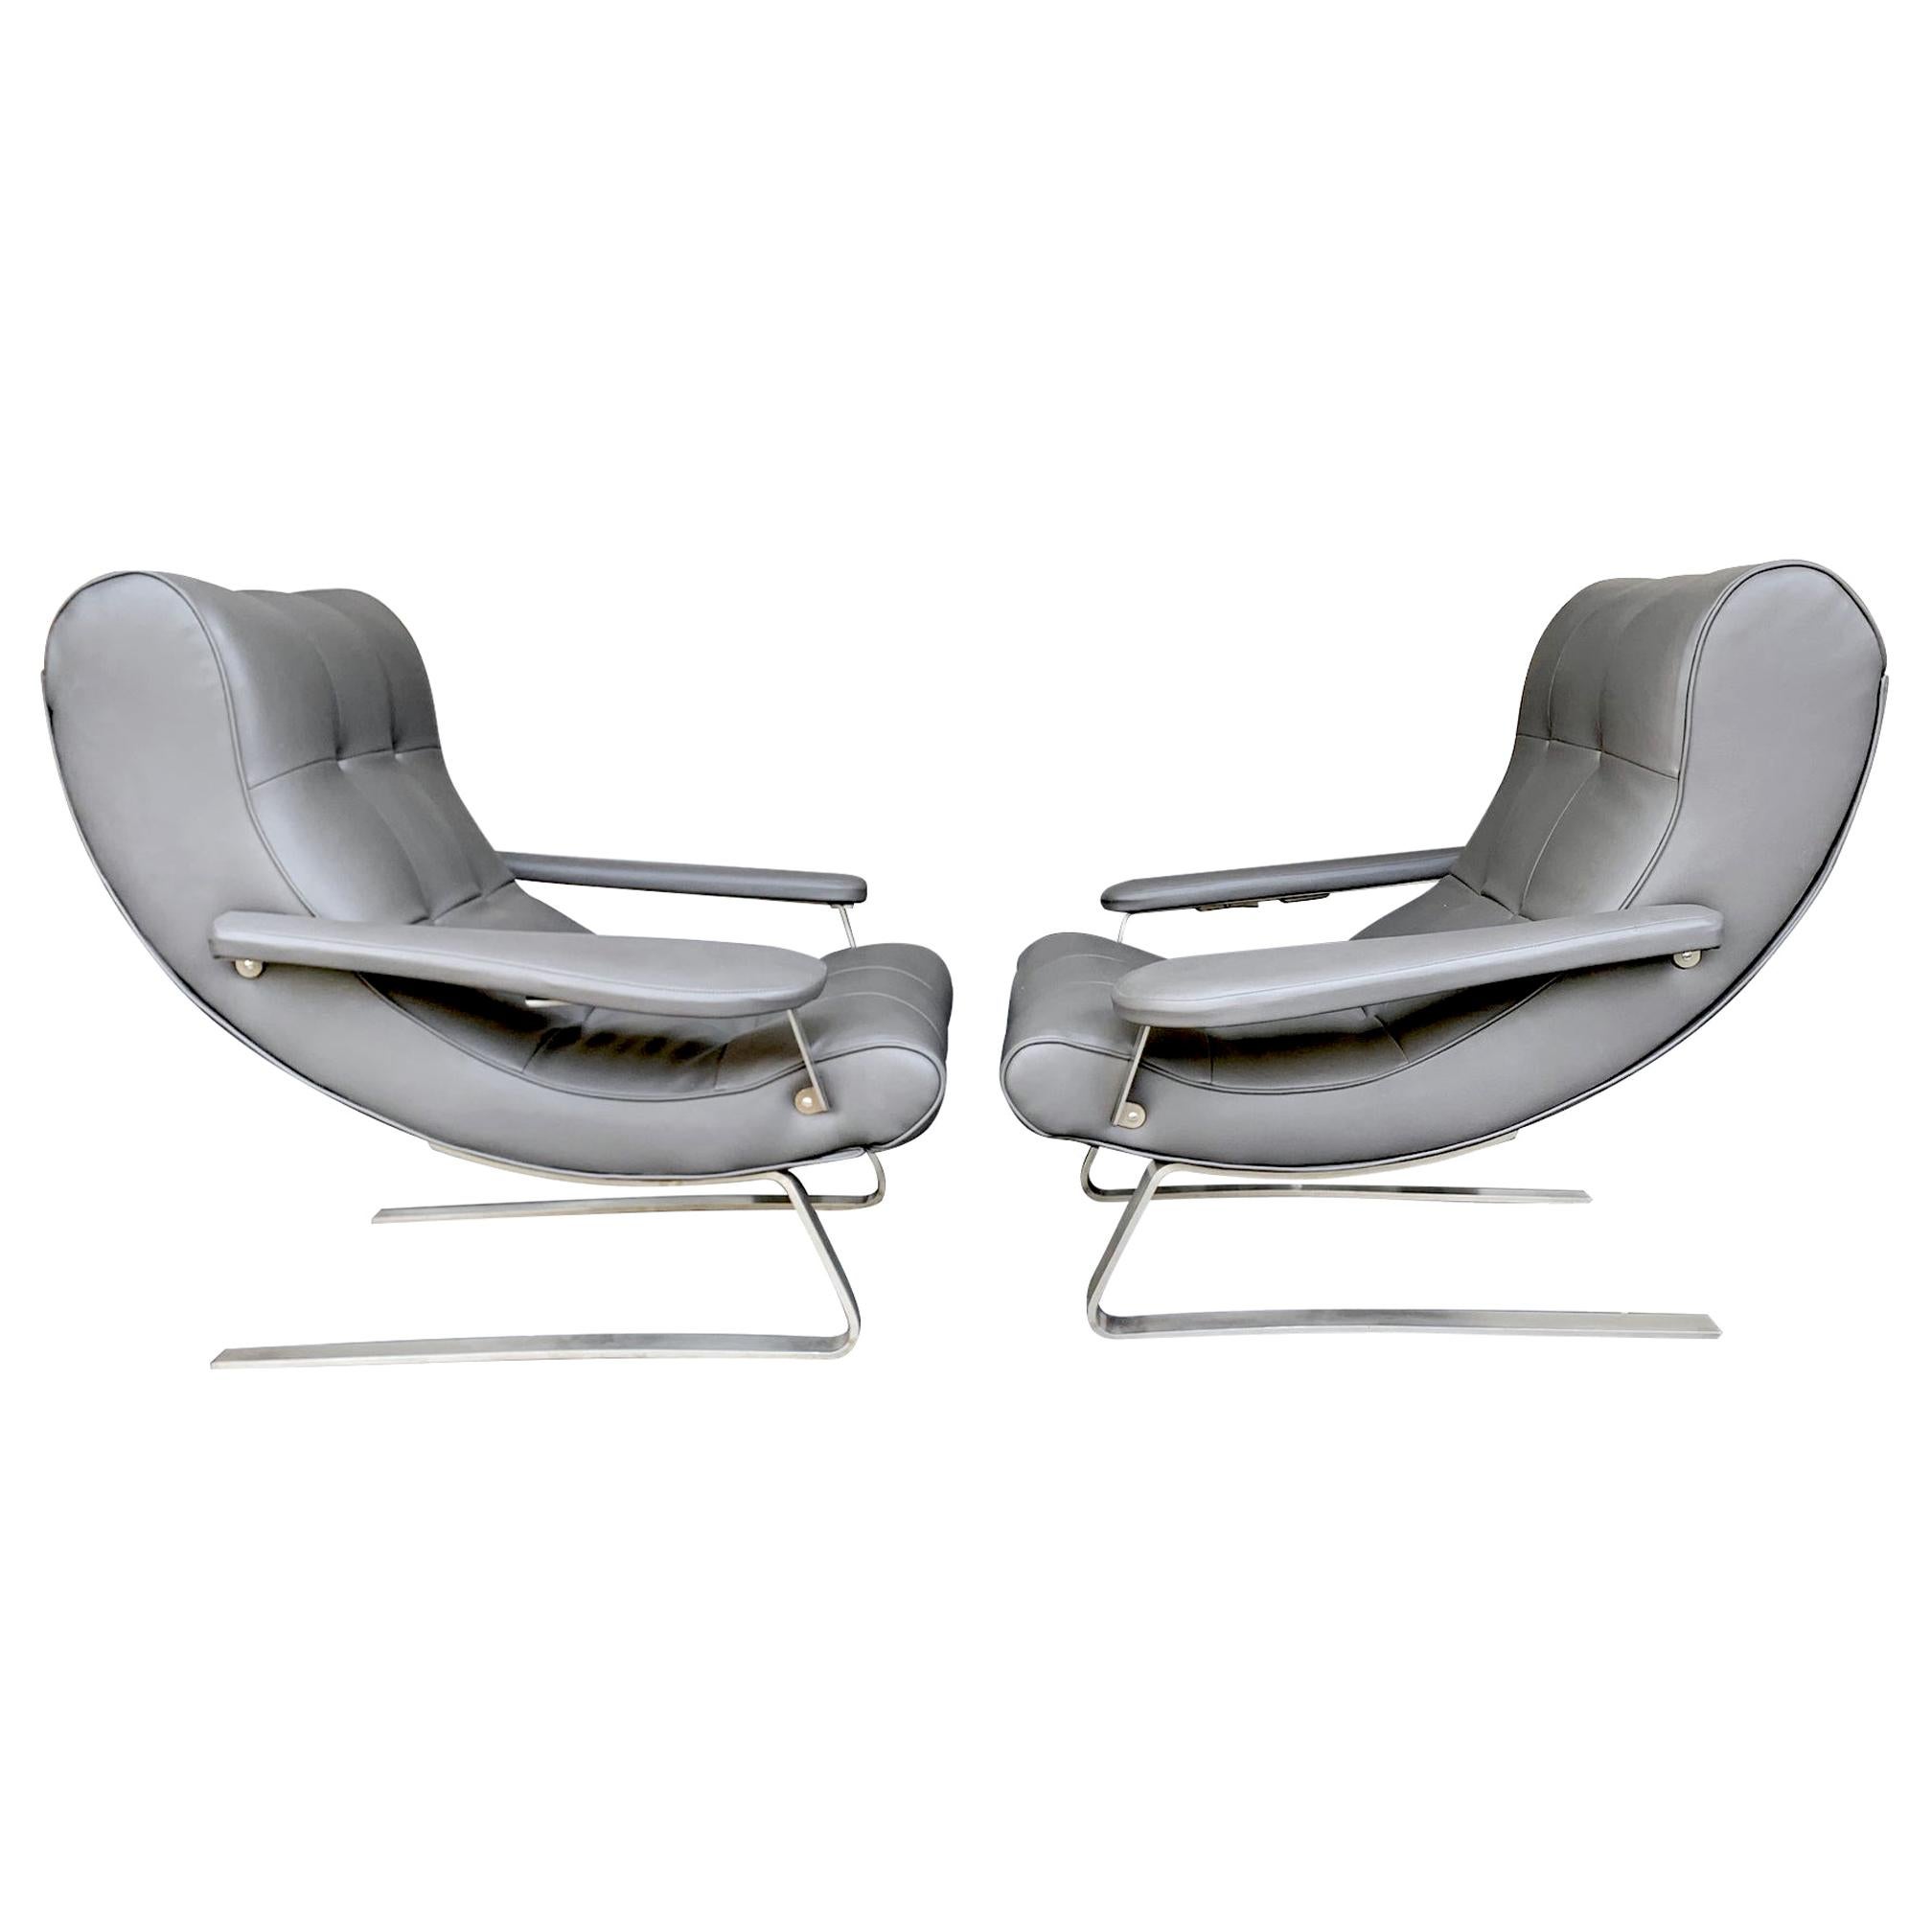 Unusual Pair of Italian 1970s Cantilevered Armchairs with Brushed Metal Legs